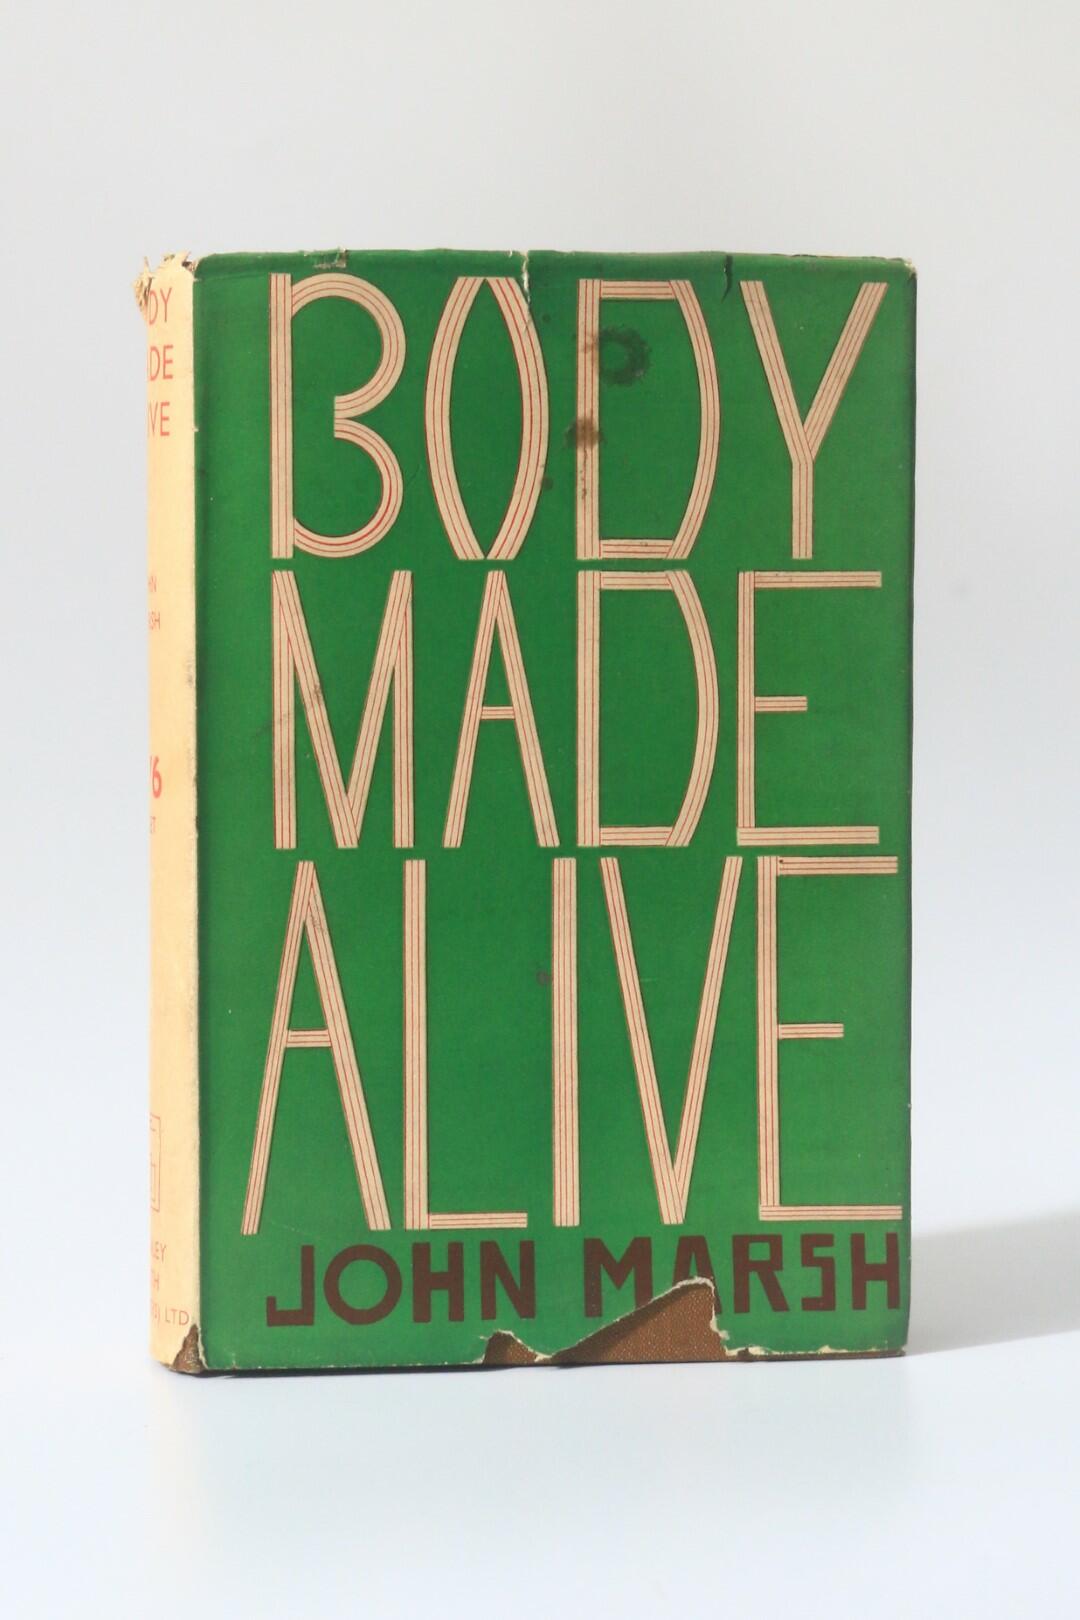 John Marsh - Body Made Alive: A Study in the Macabre - Stanley Smith, 1936, First Edition.